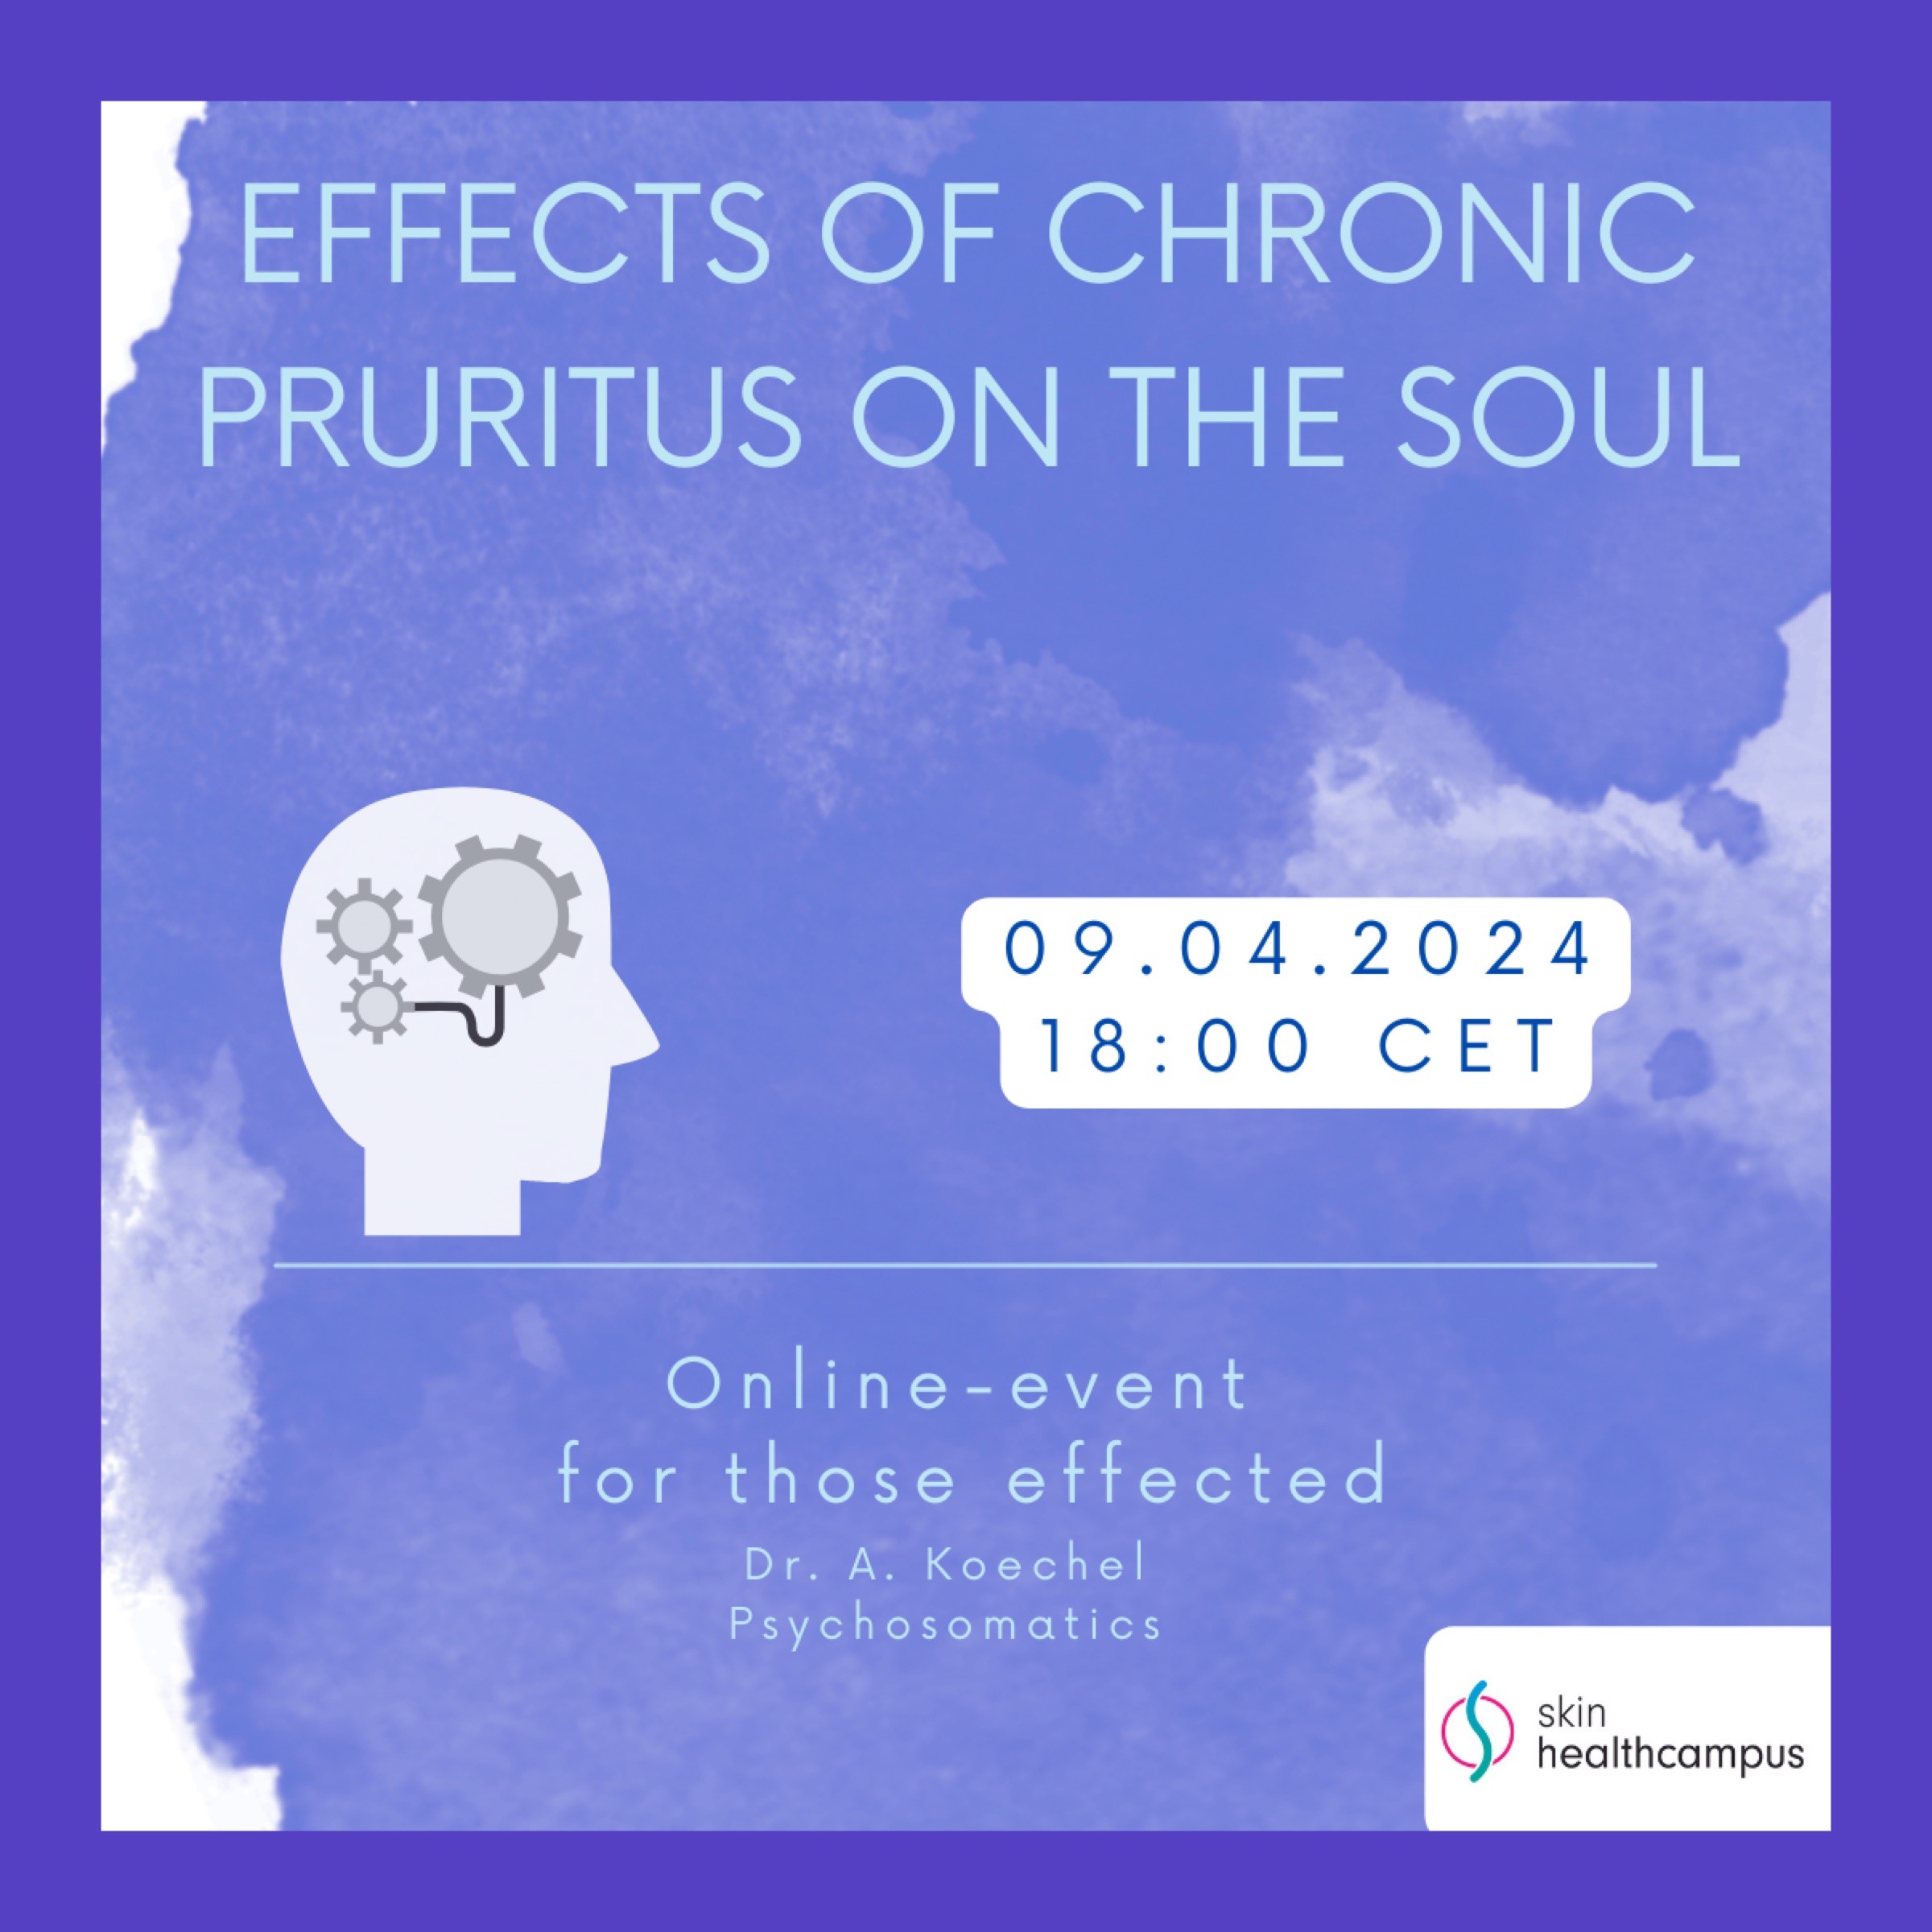 Effect of chronic pruritus on the soul